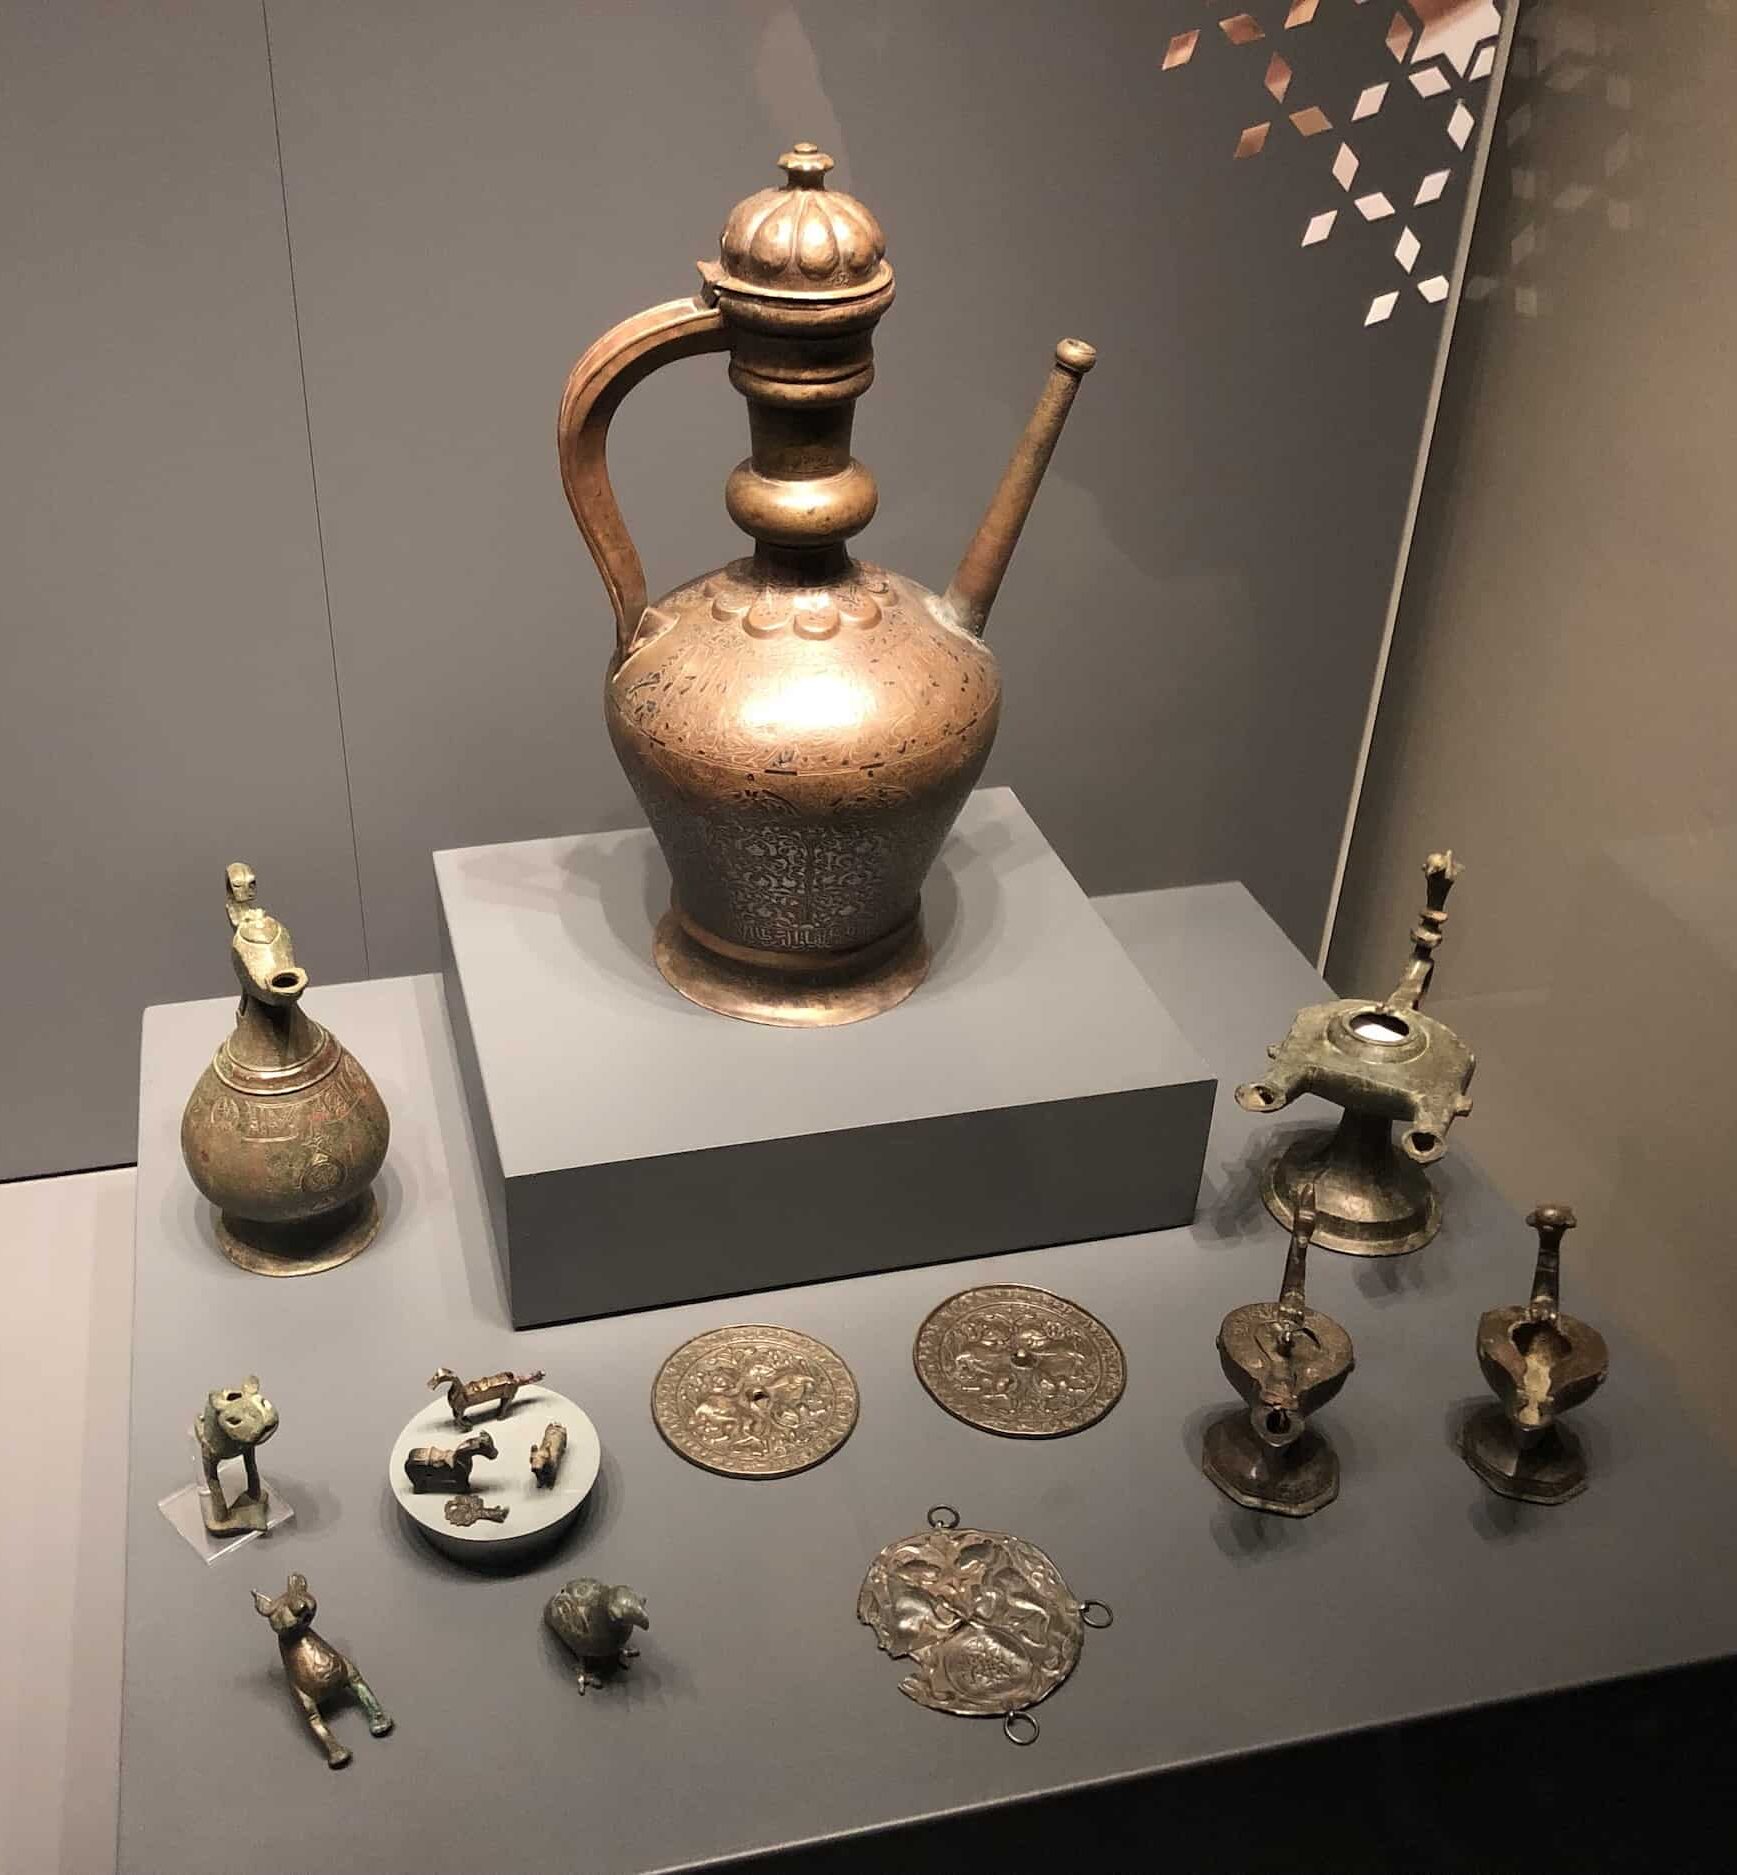 Metal works from the Great Seljuk period